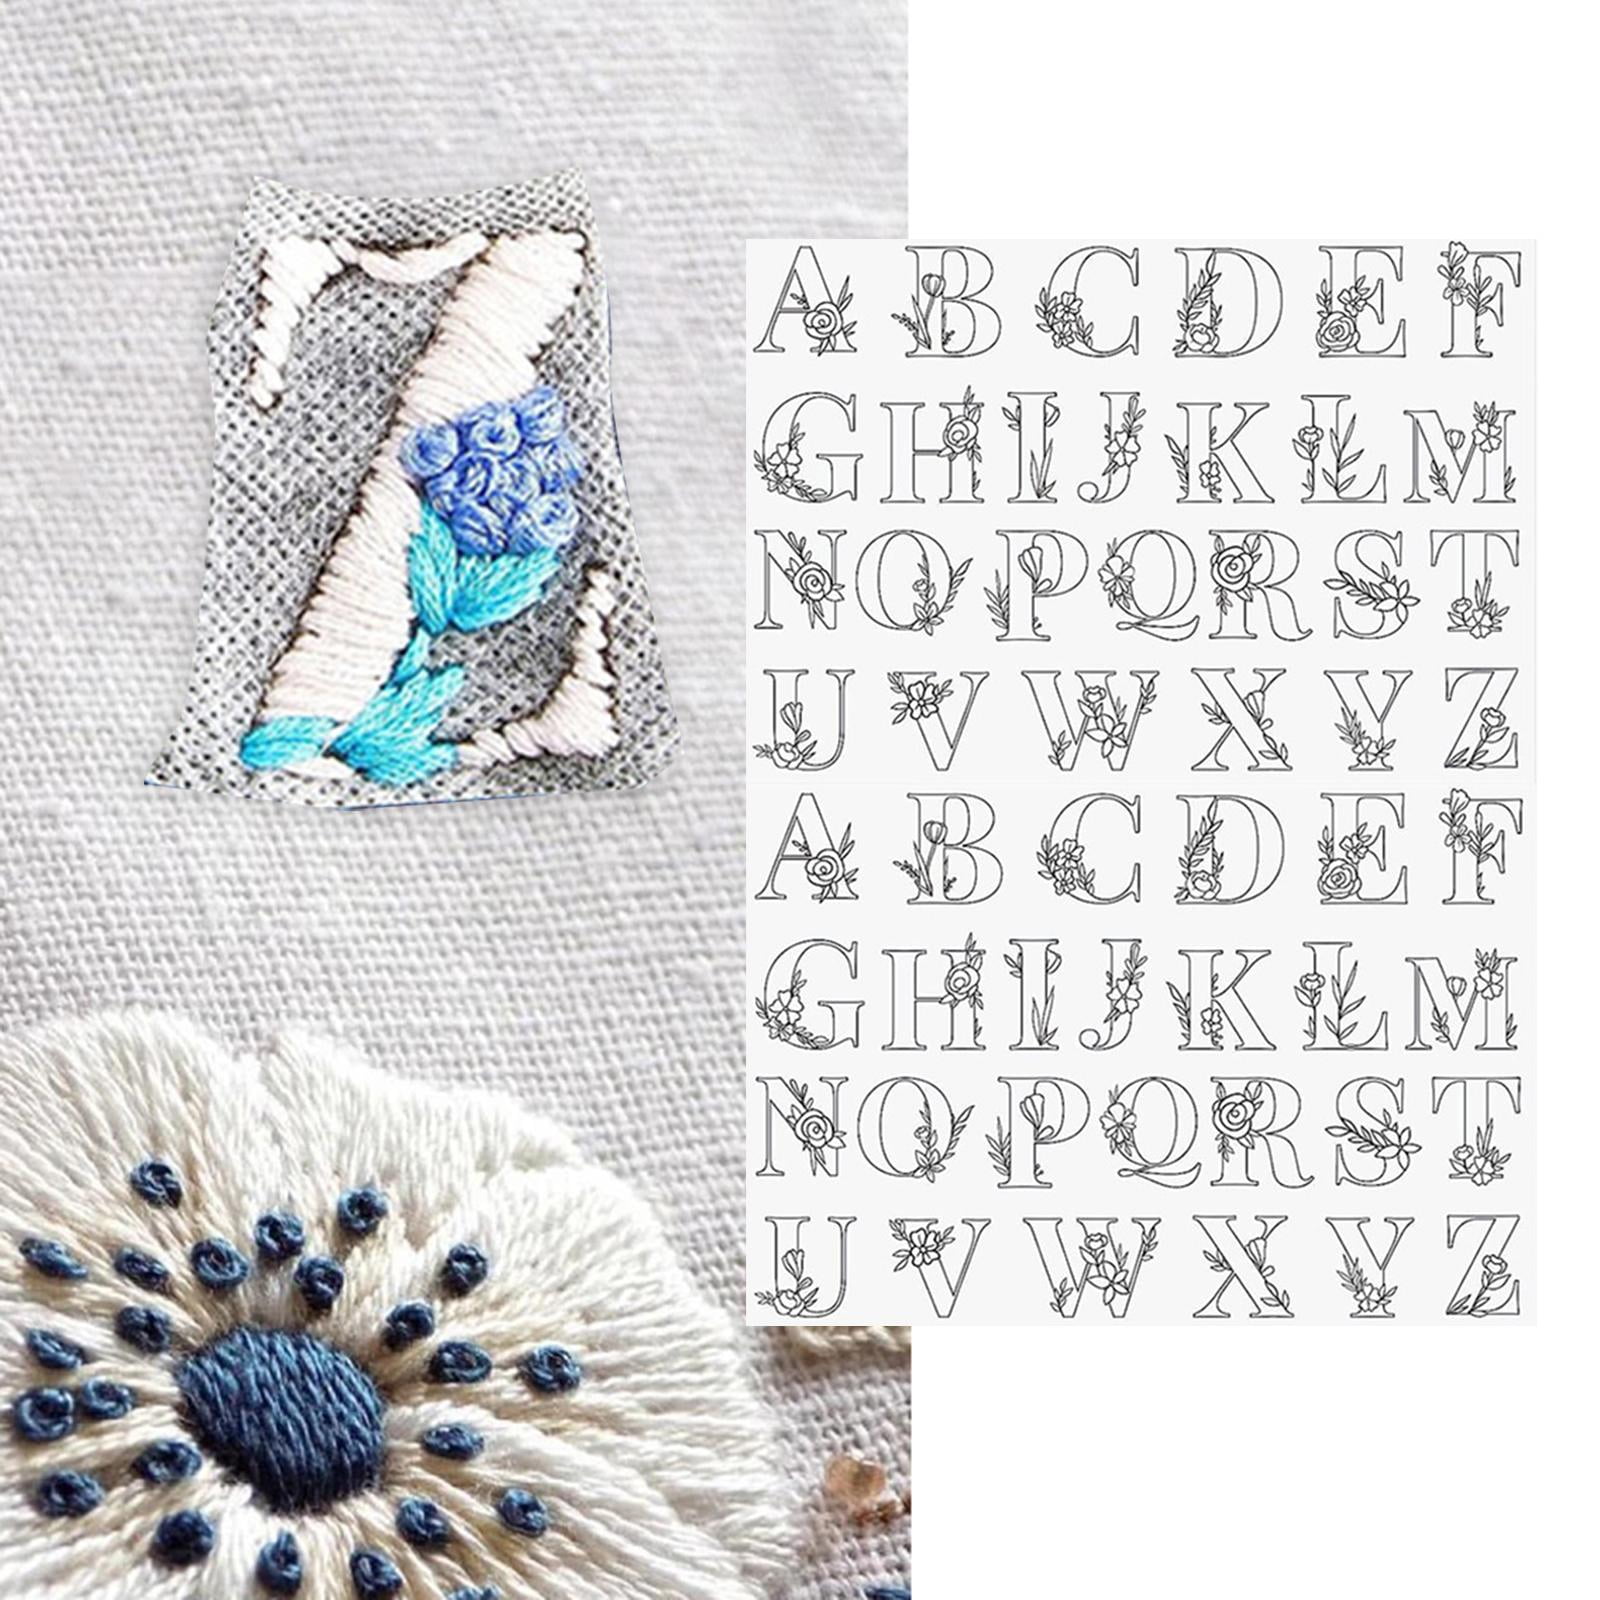 50pcs Water-soluble Embroidery Stabilizers, Pasted And Sewn With Embroidery  Paper, With Pre Printed Flower And Leaf Pattern Transfer, Suitable For Man